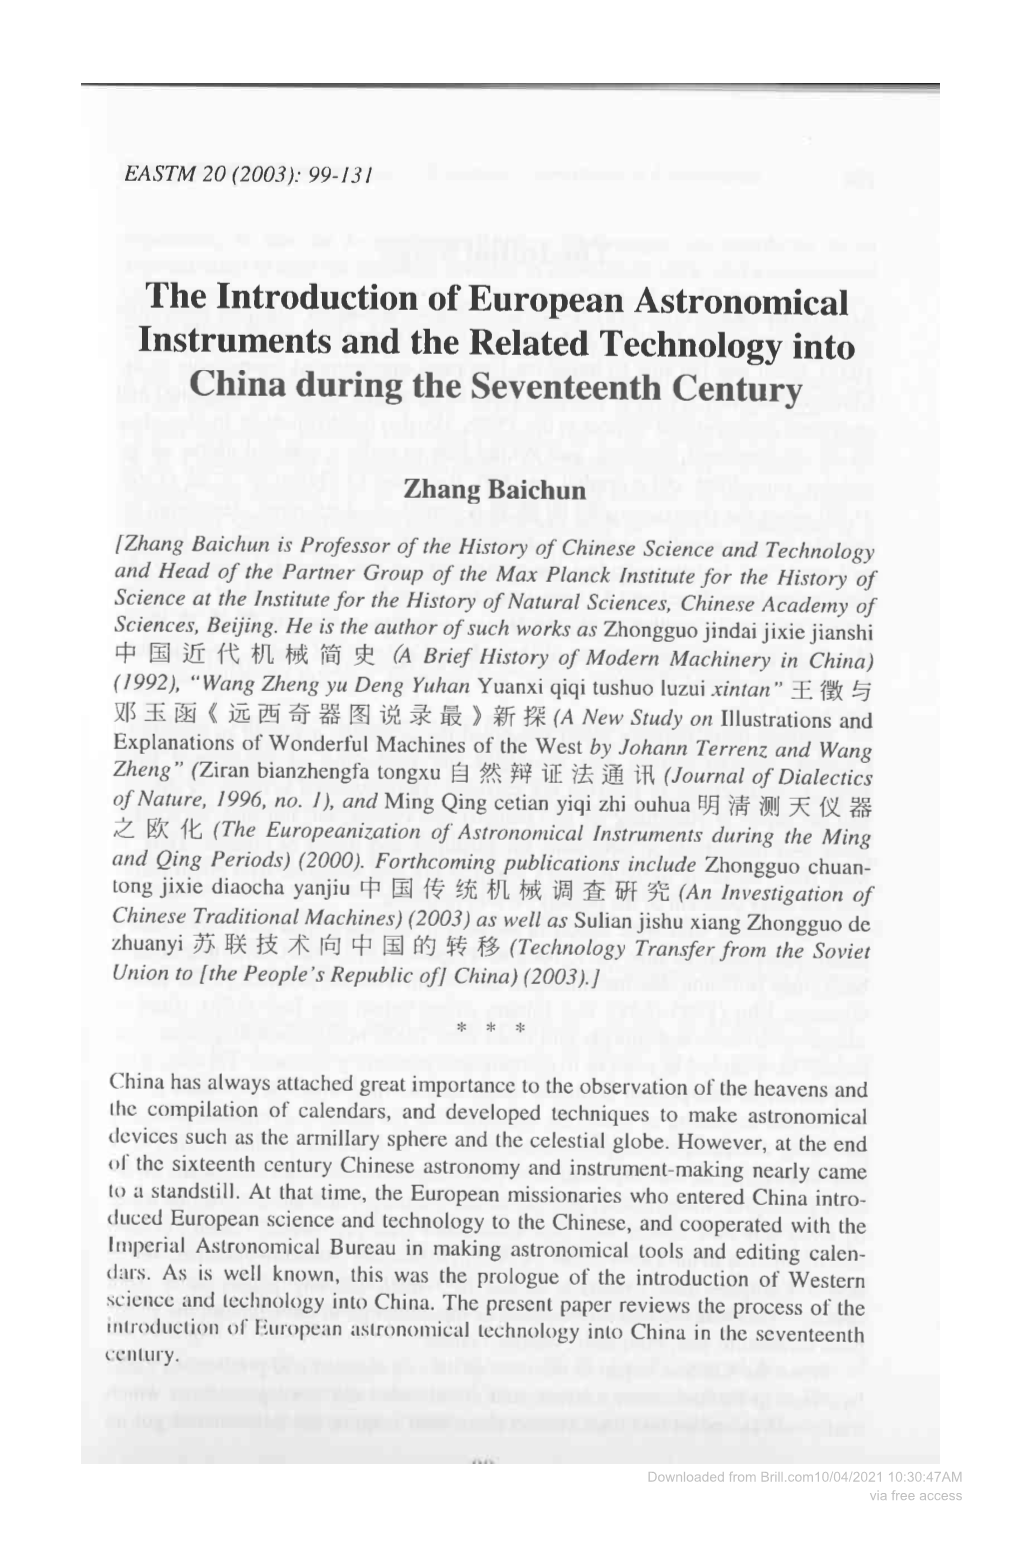 The Introduction of European Astronomical Instruments and the Related Technology Into China During the Seventeenth Century